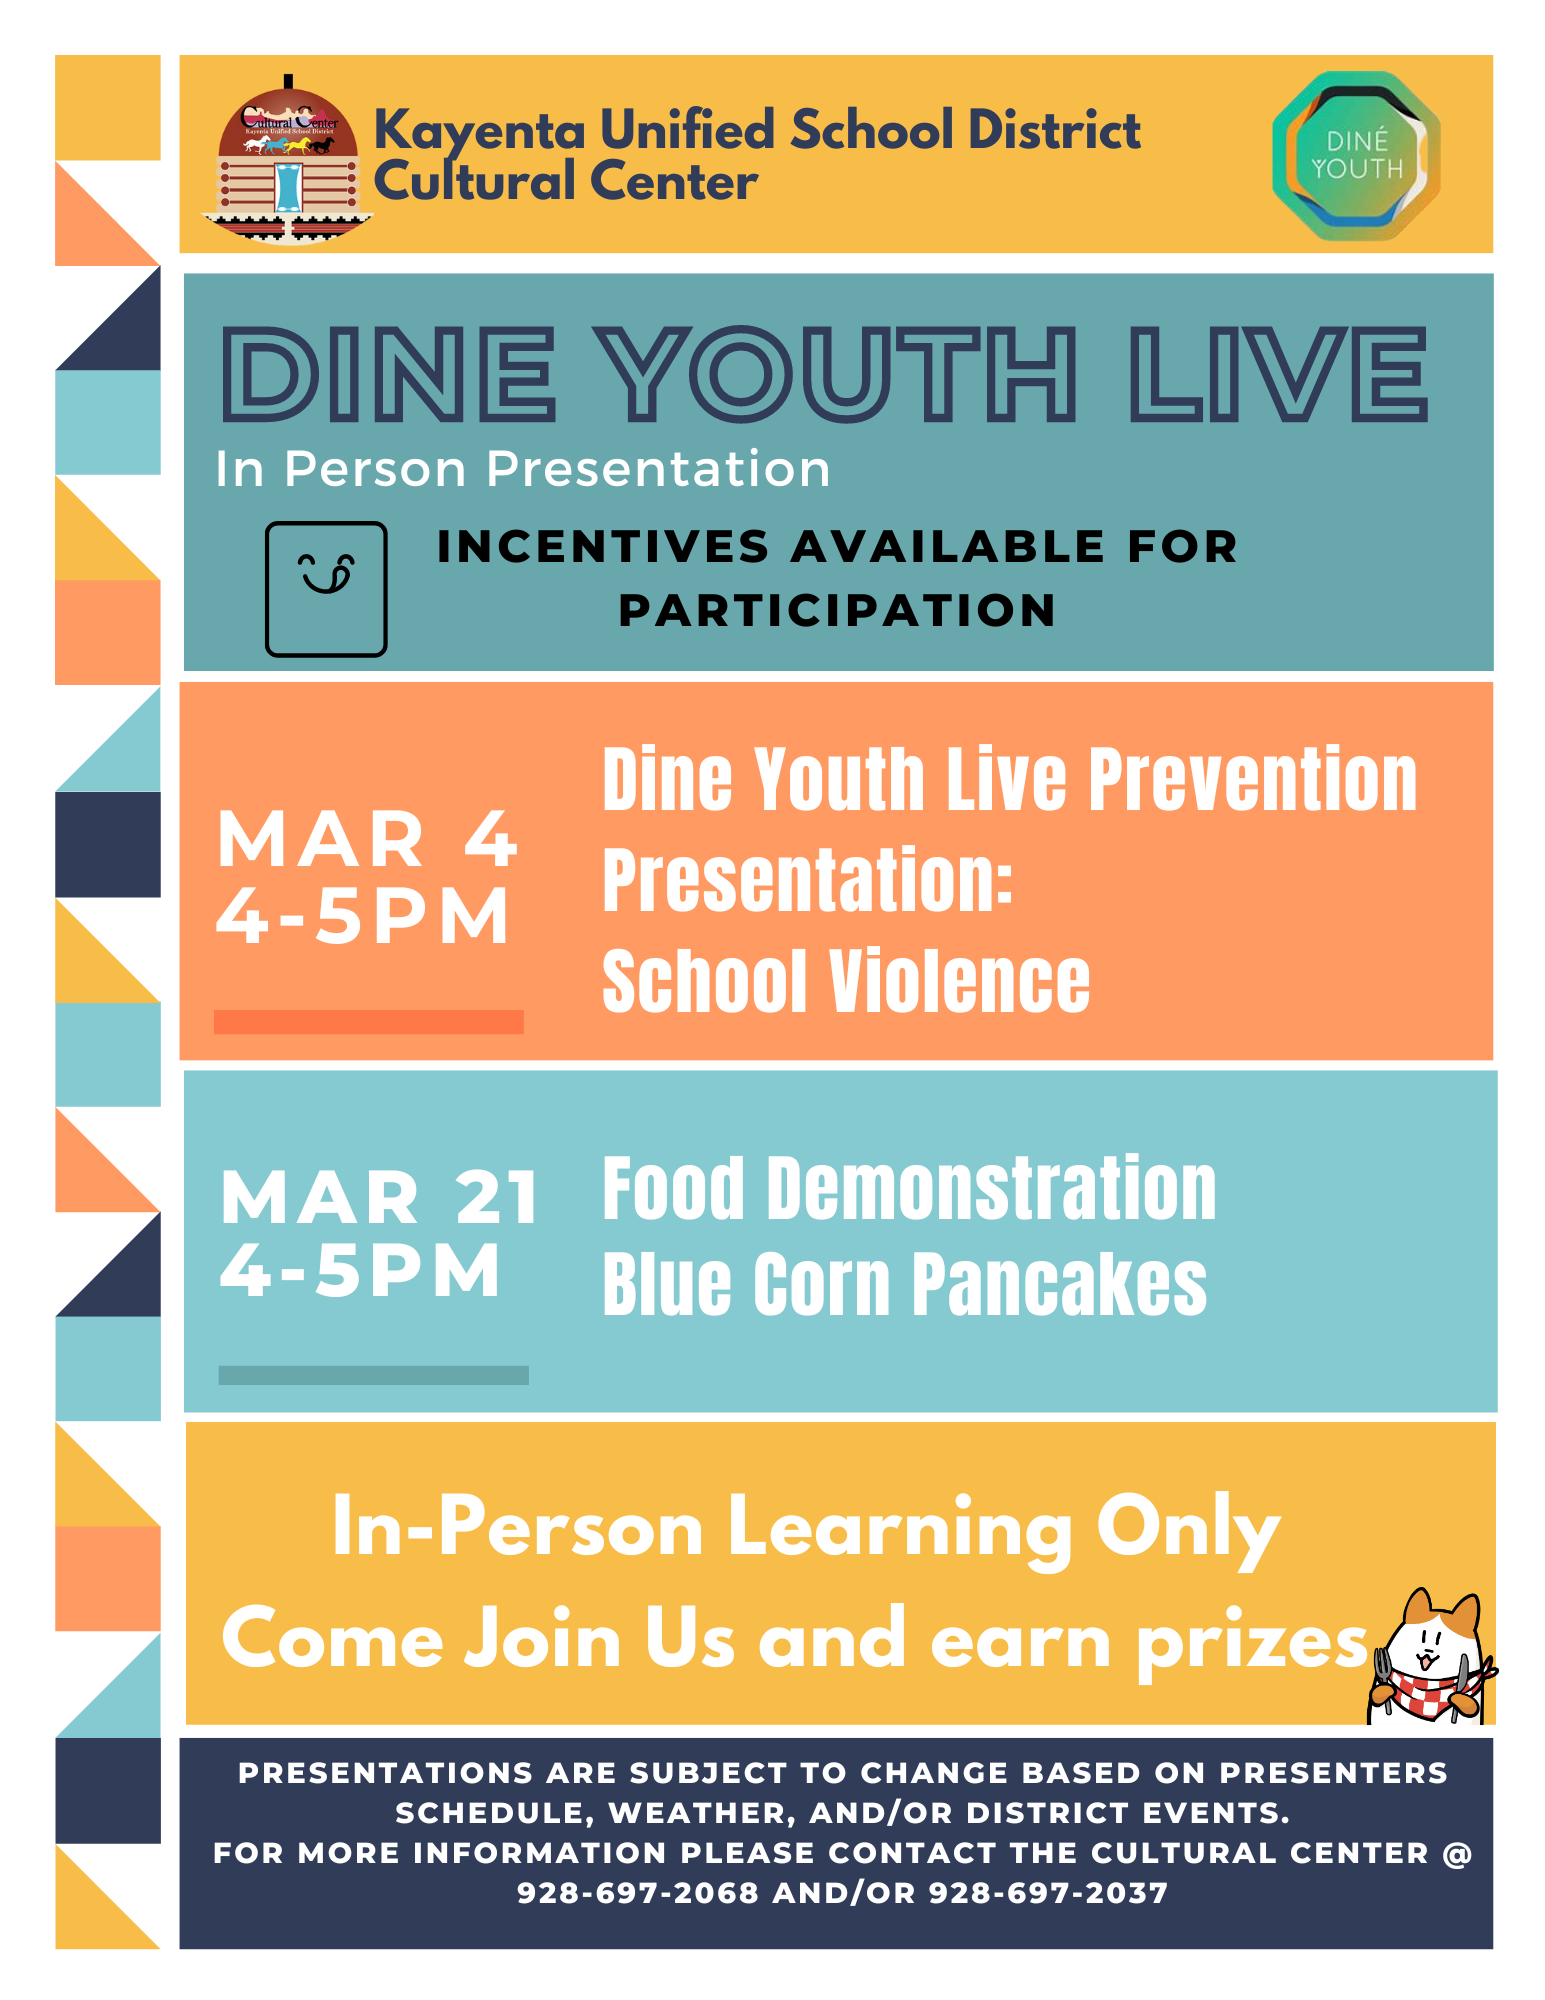 Dine Youth Live